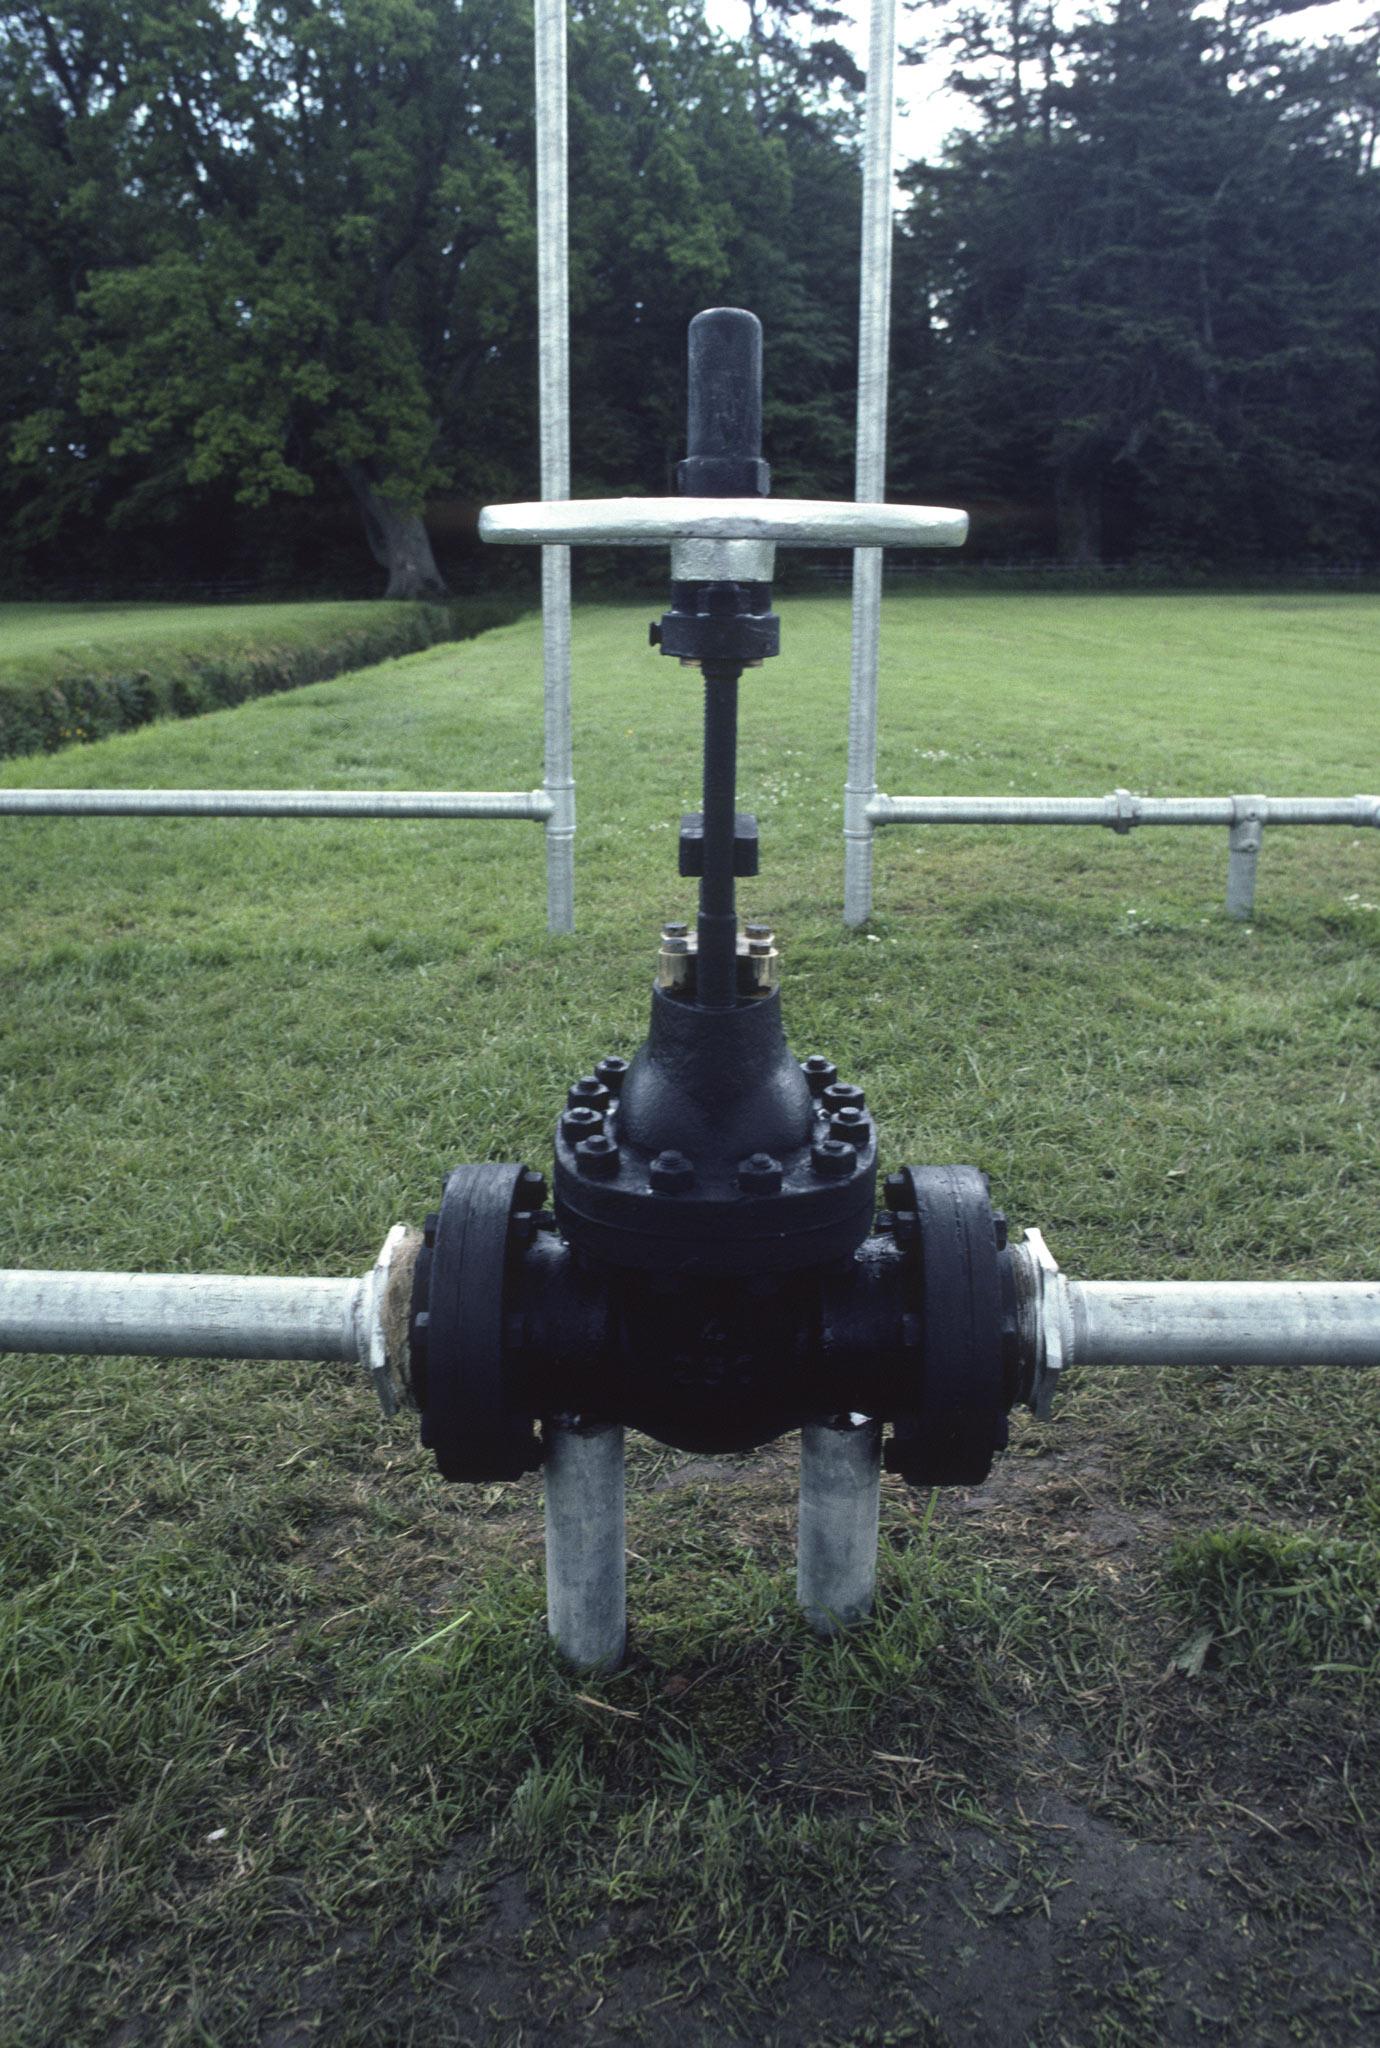 a valve that can be turned by hand to turn water on and off through galvanized steel pipes